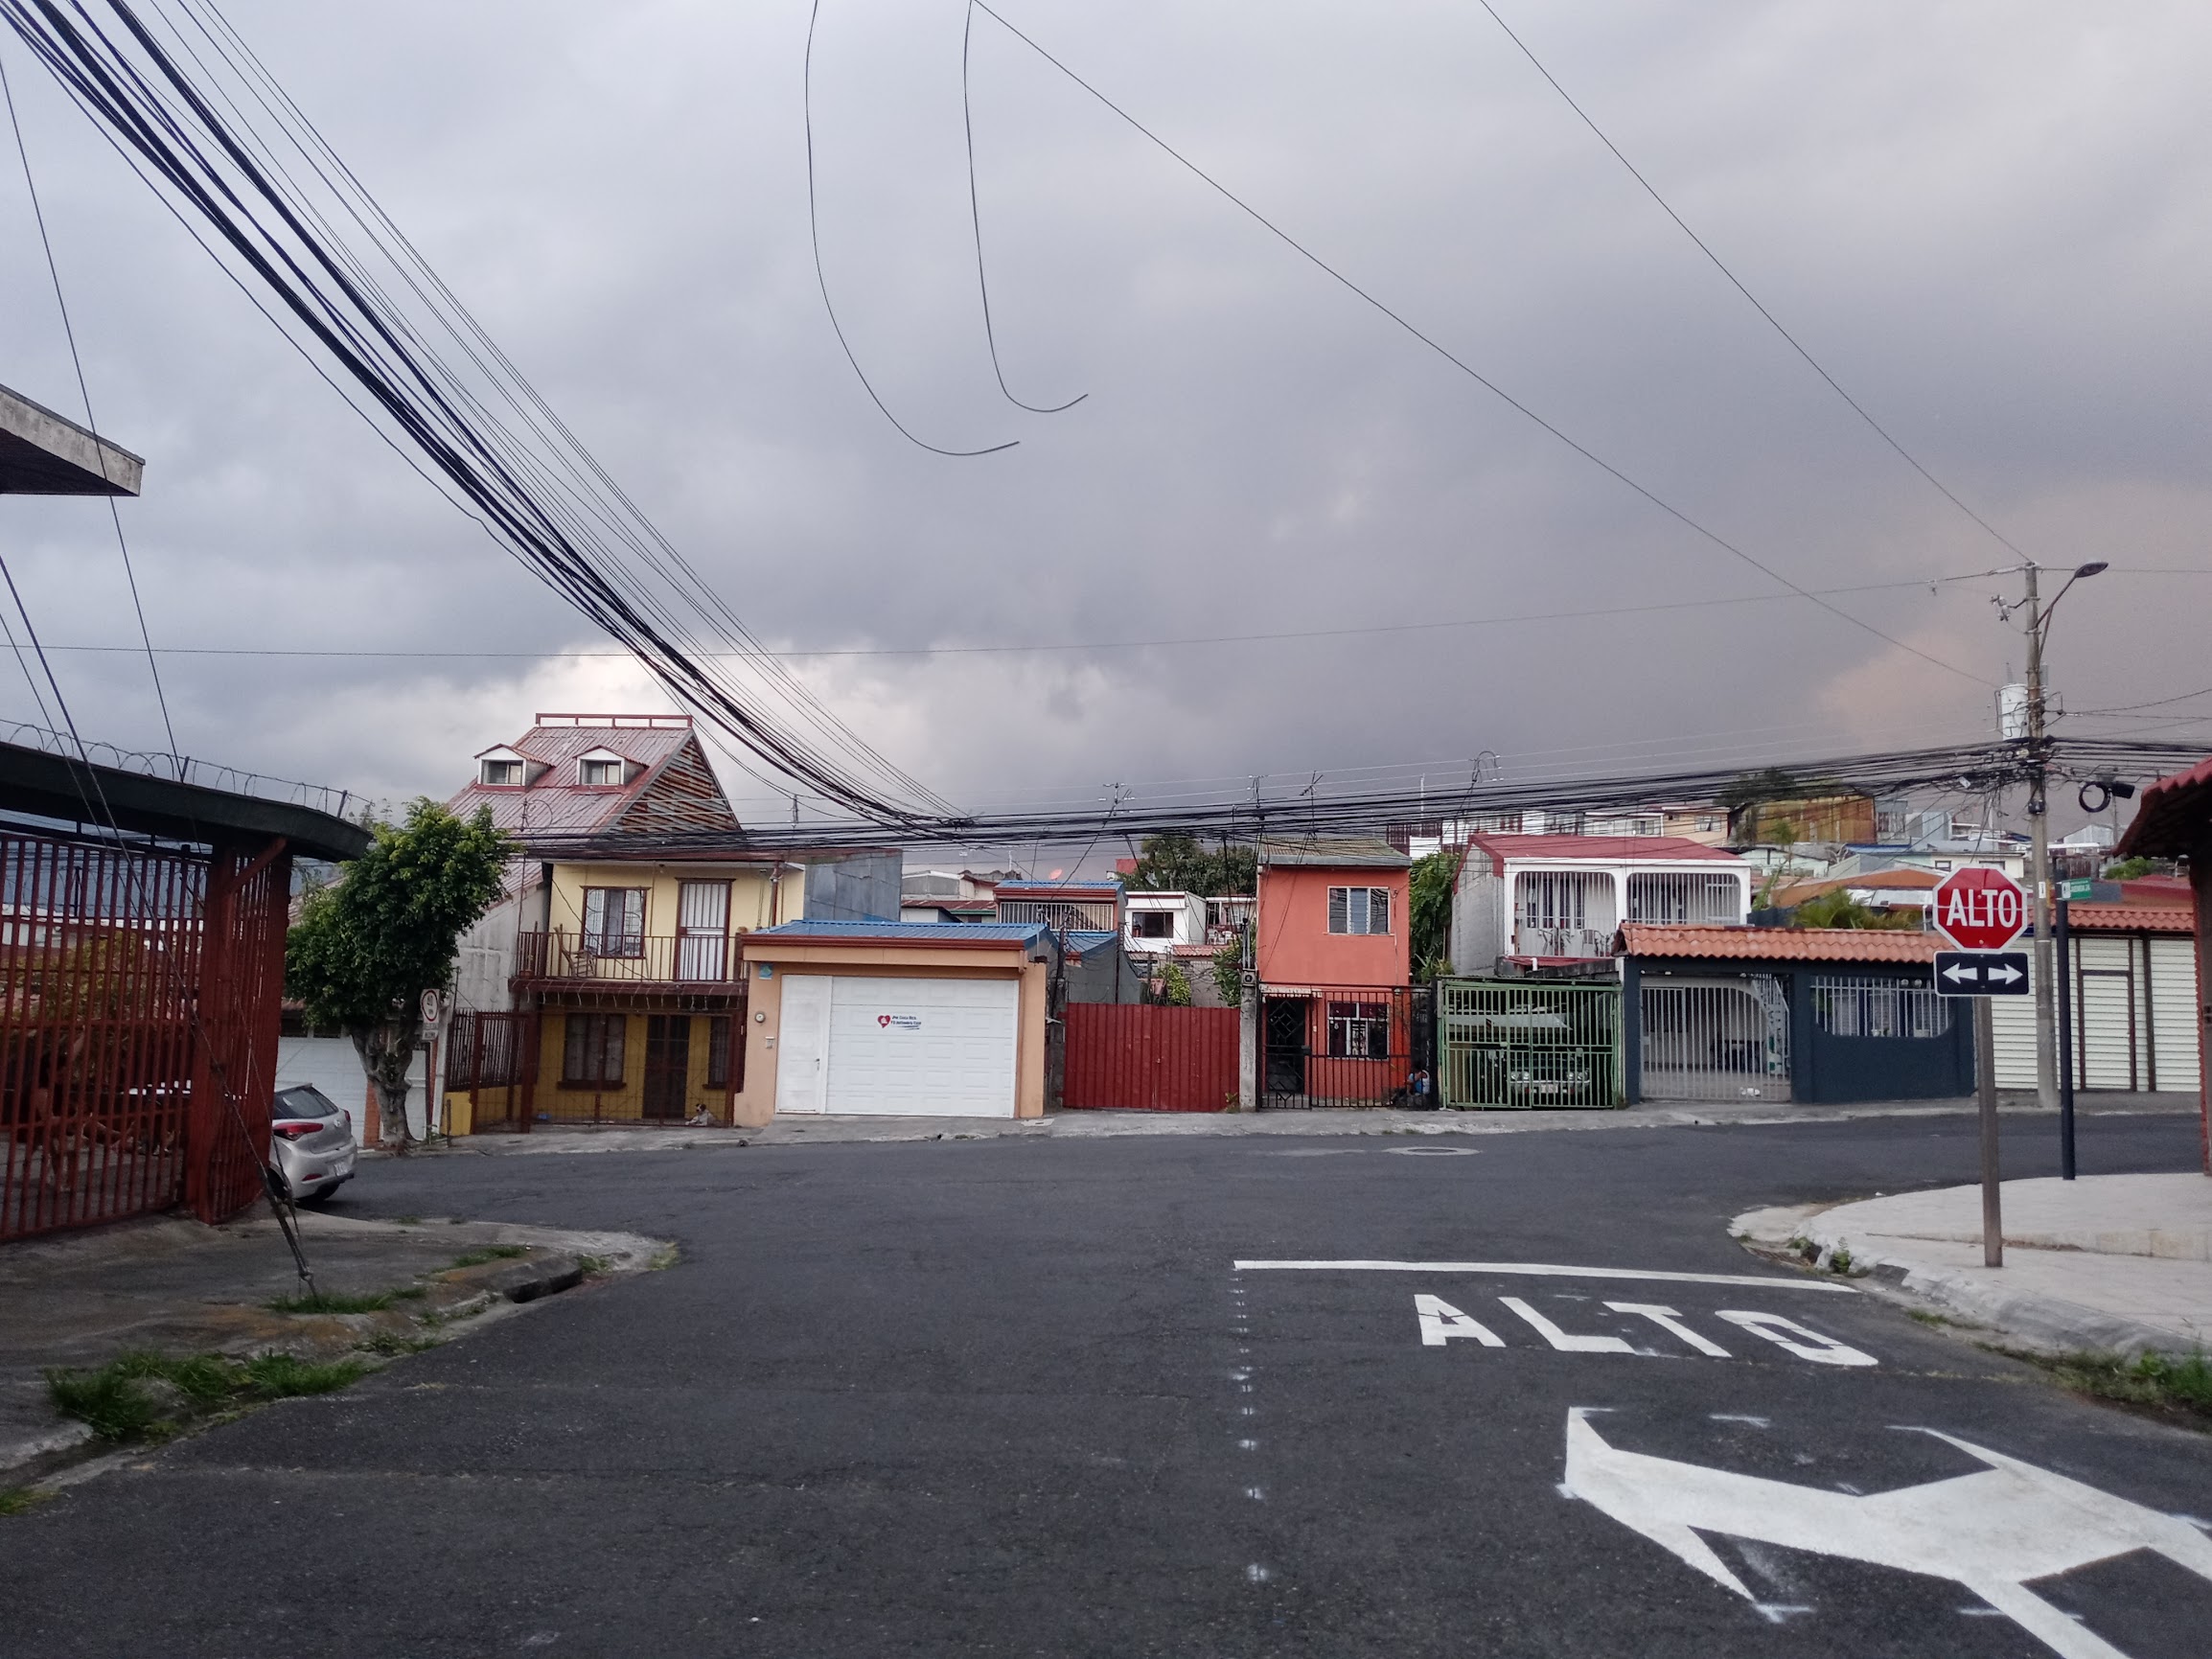 Navigating Costa Rica (Local Travel Tips Part I)